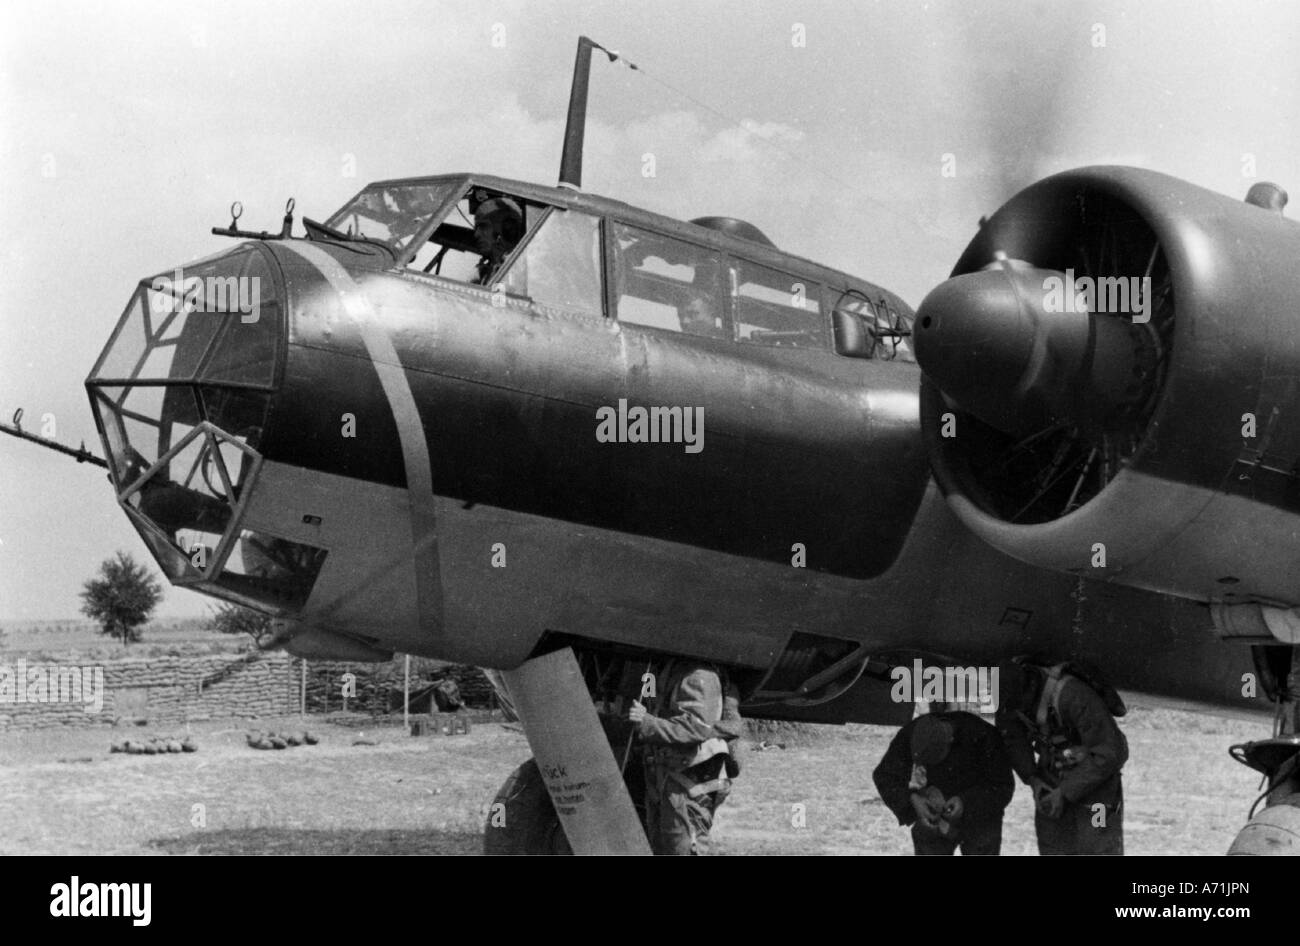 events, Second World War / WWII, aerial warfare, aircraft, German bomber Dornier Do 17 preparing for take-off, France, summer 1940, Do-17 Z, Do17, bomber, wing, flying, 20th century, historic, historical, Battle of Britain, Luftwaffe, Wehrmacht, Germany, Great Britain, Third Reich, plane, planes, crew members, boarding, 1940s, people, Stock Photo